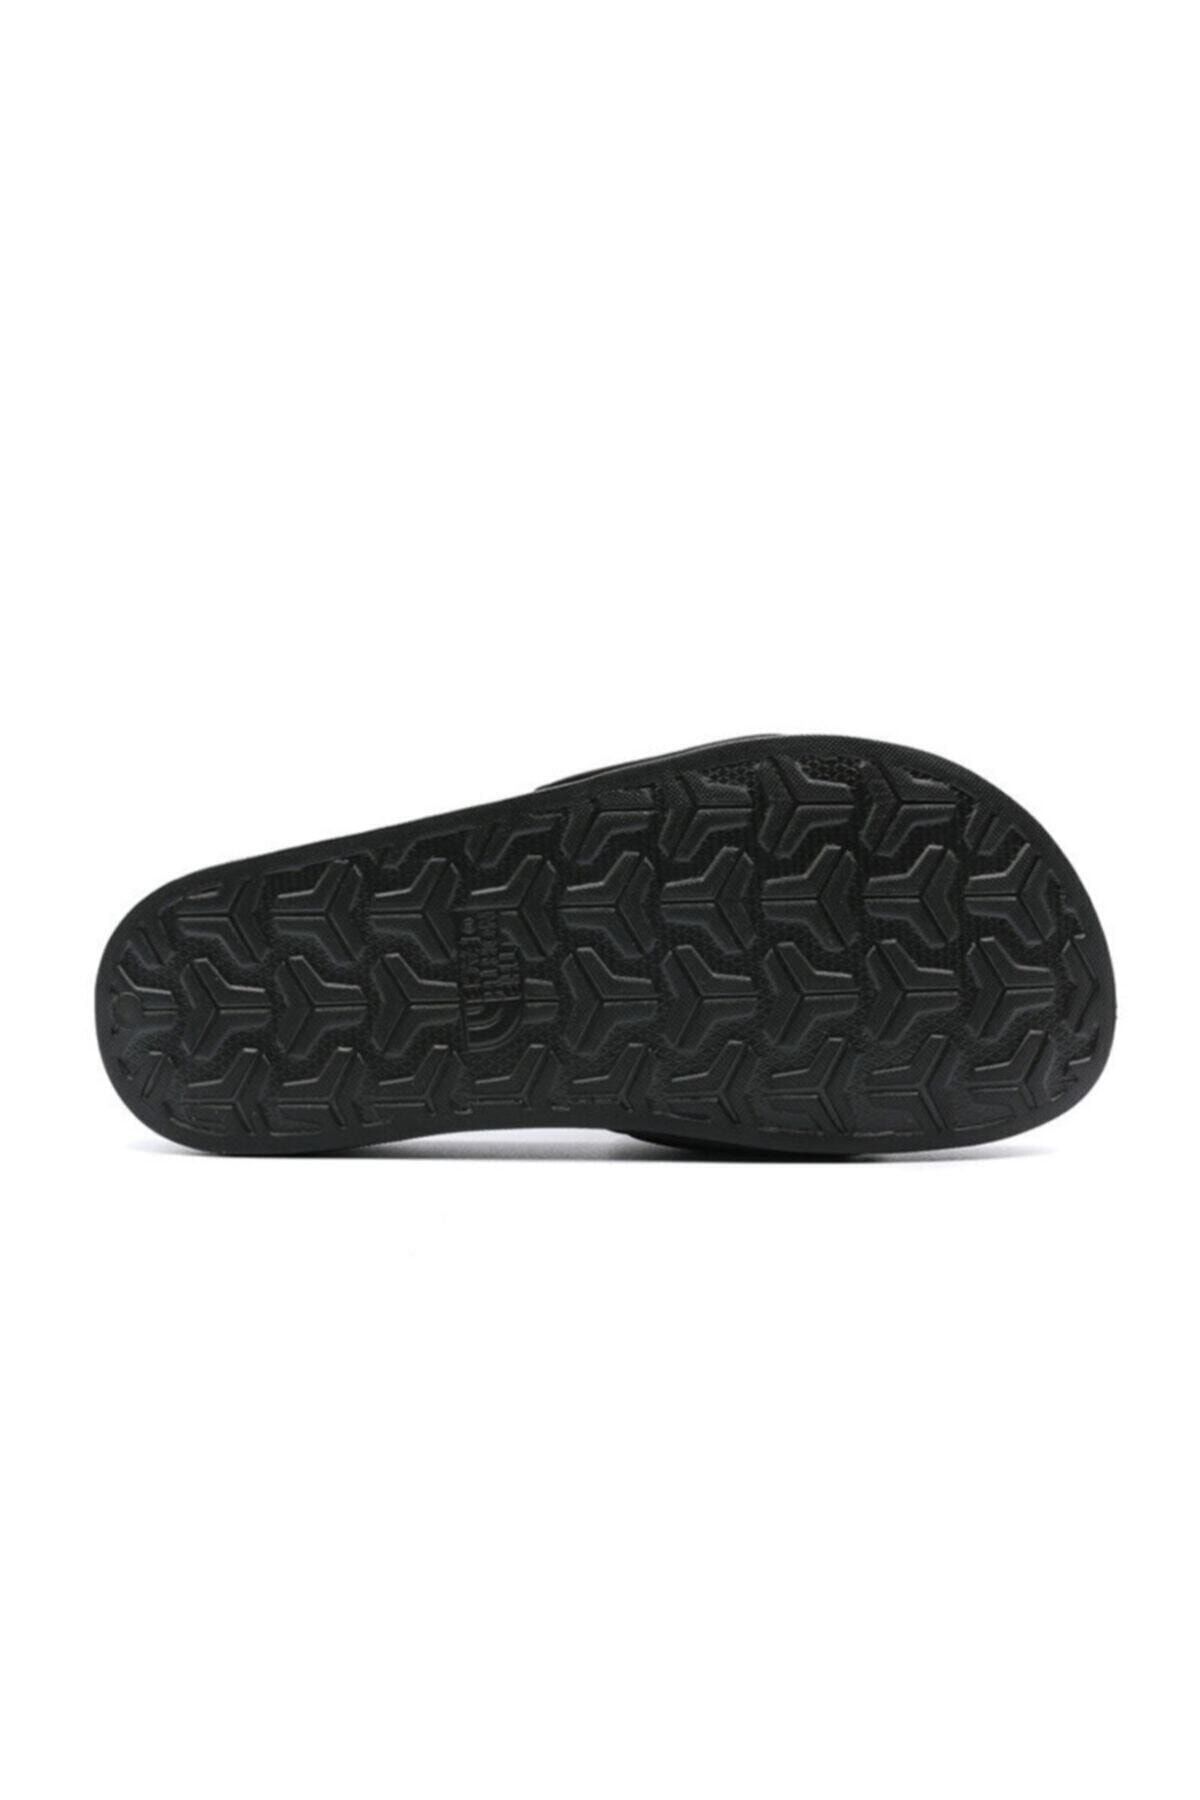 The North Face Slipper Black M Base Camp Slide III NF0A4T2RKY41